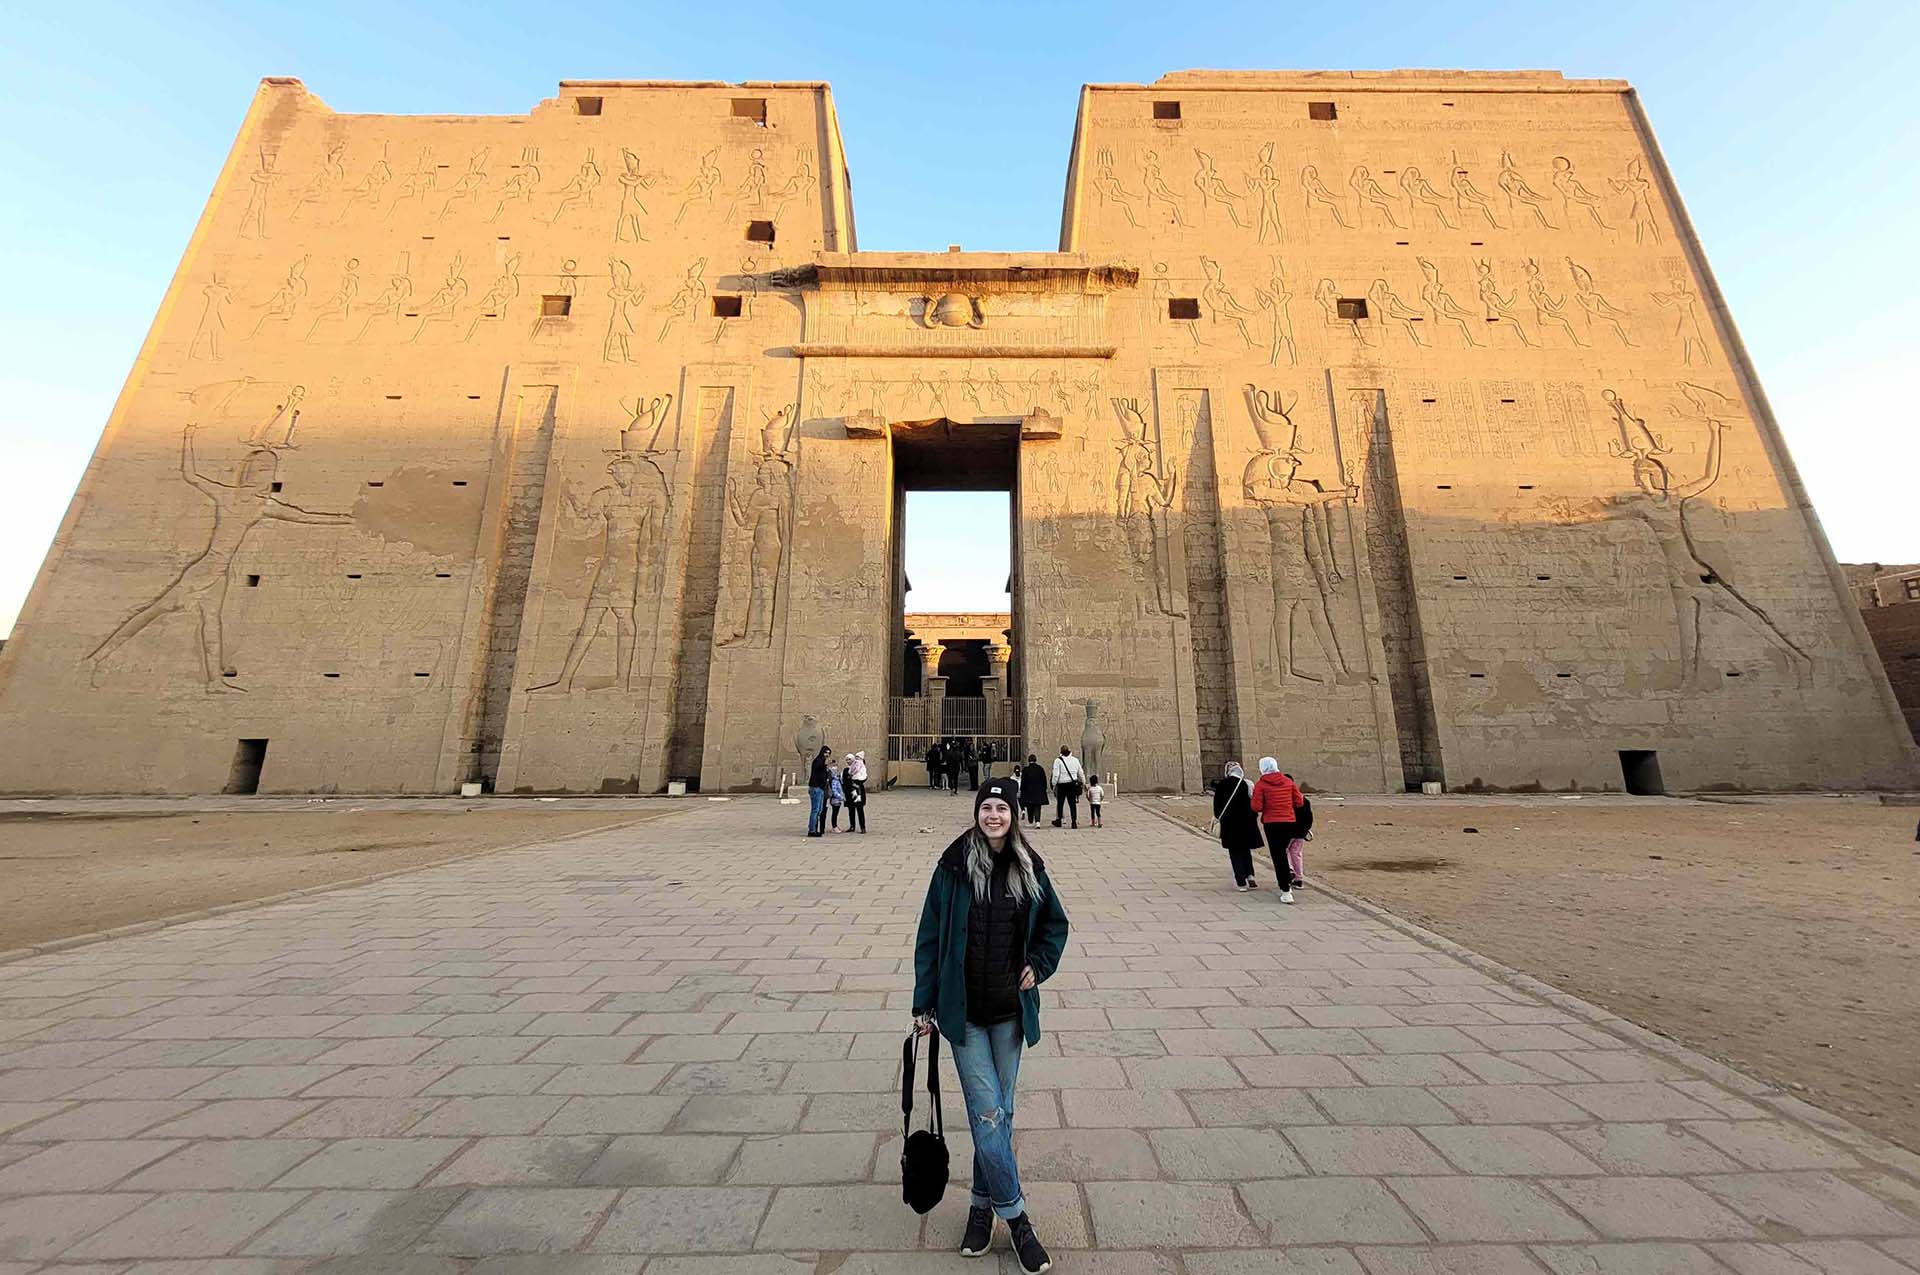 Sunrise view of the Temple of Edfu, found on the banks of the Nile in Egypt